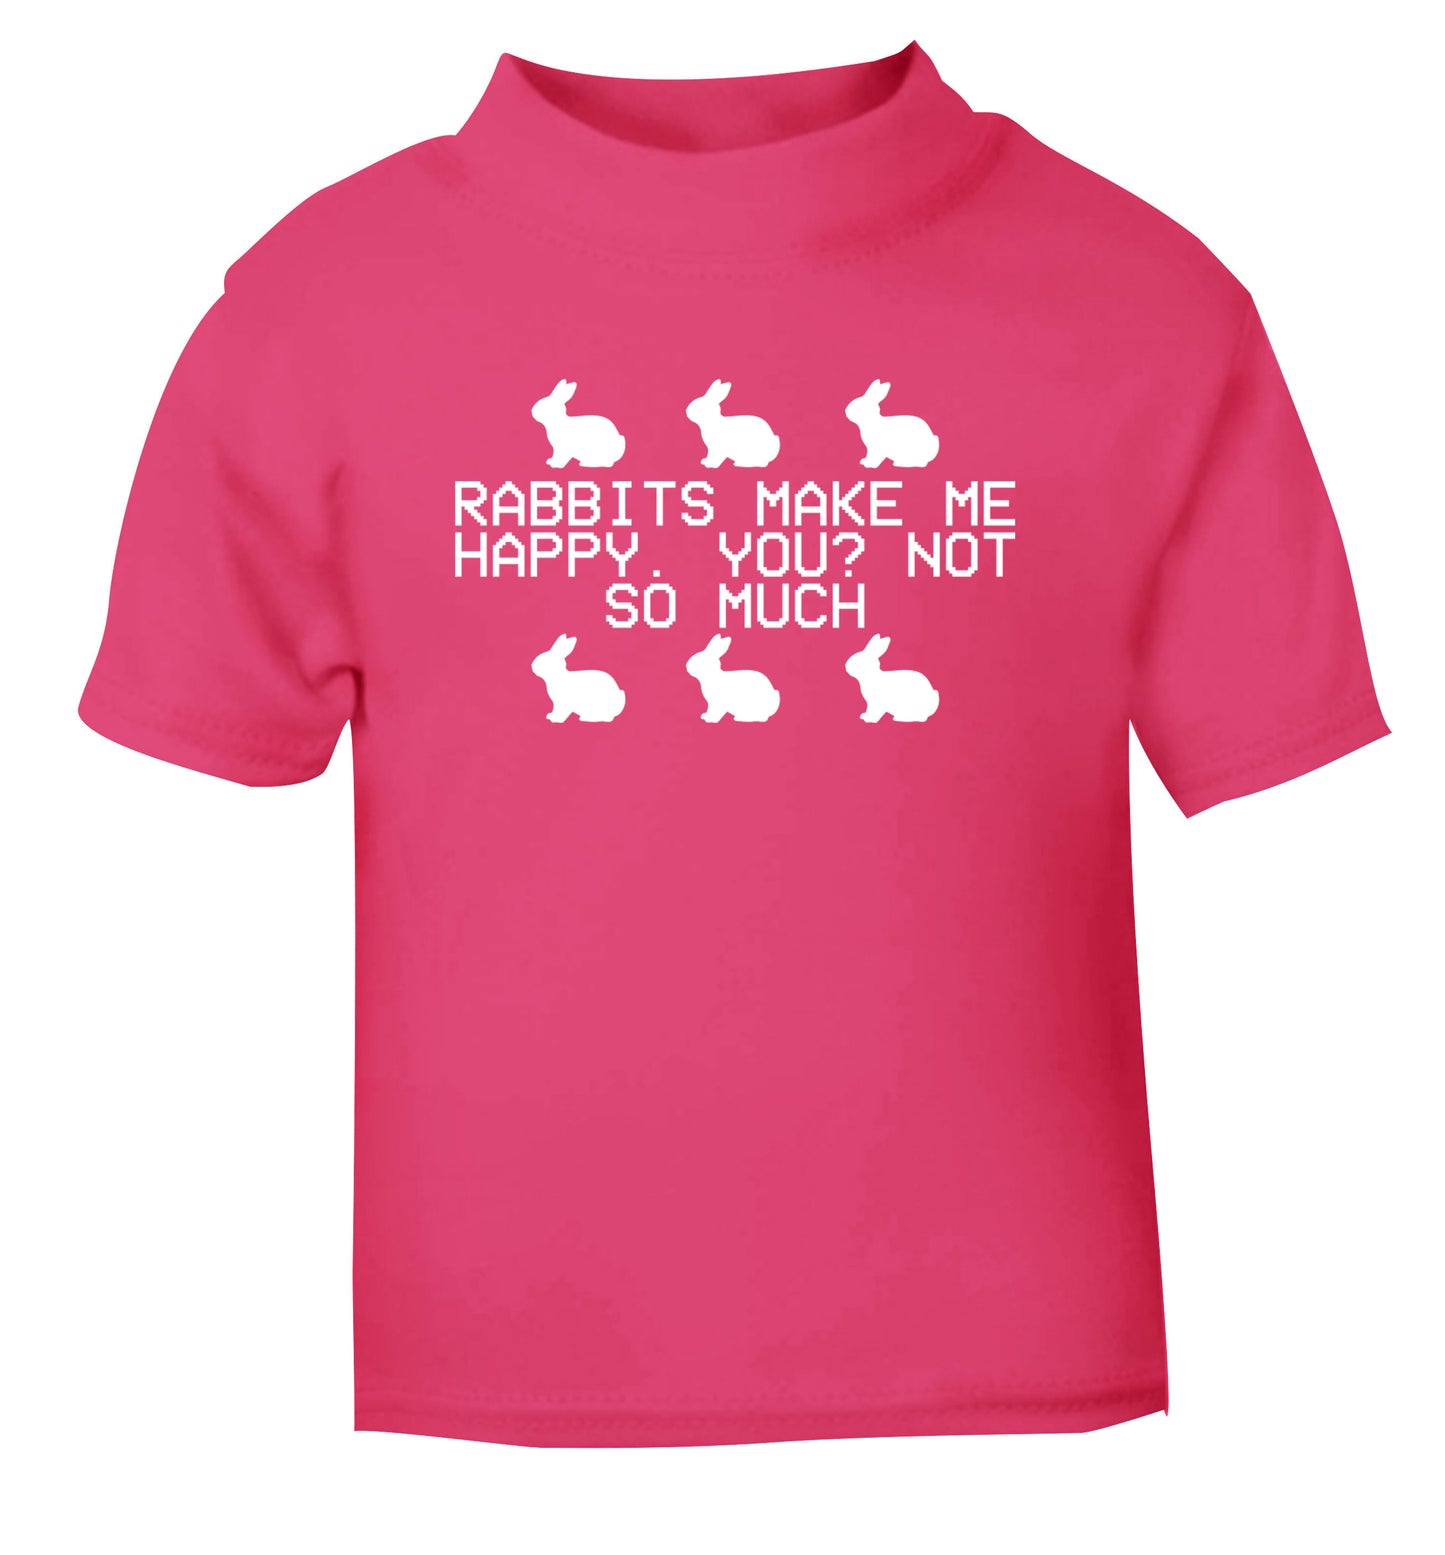 Rabbits make me happy, you not so much pink Baby Toddler Tshirt 2 Years